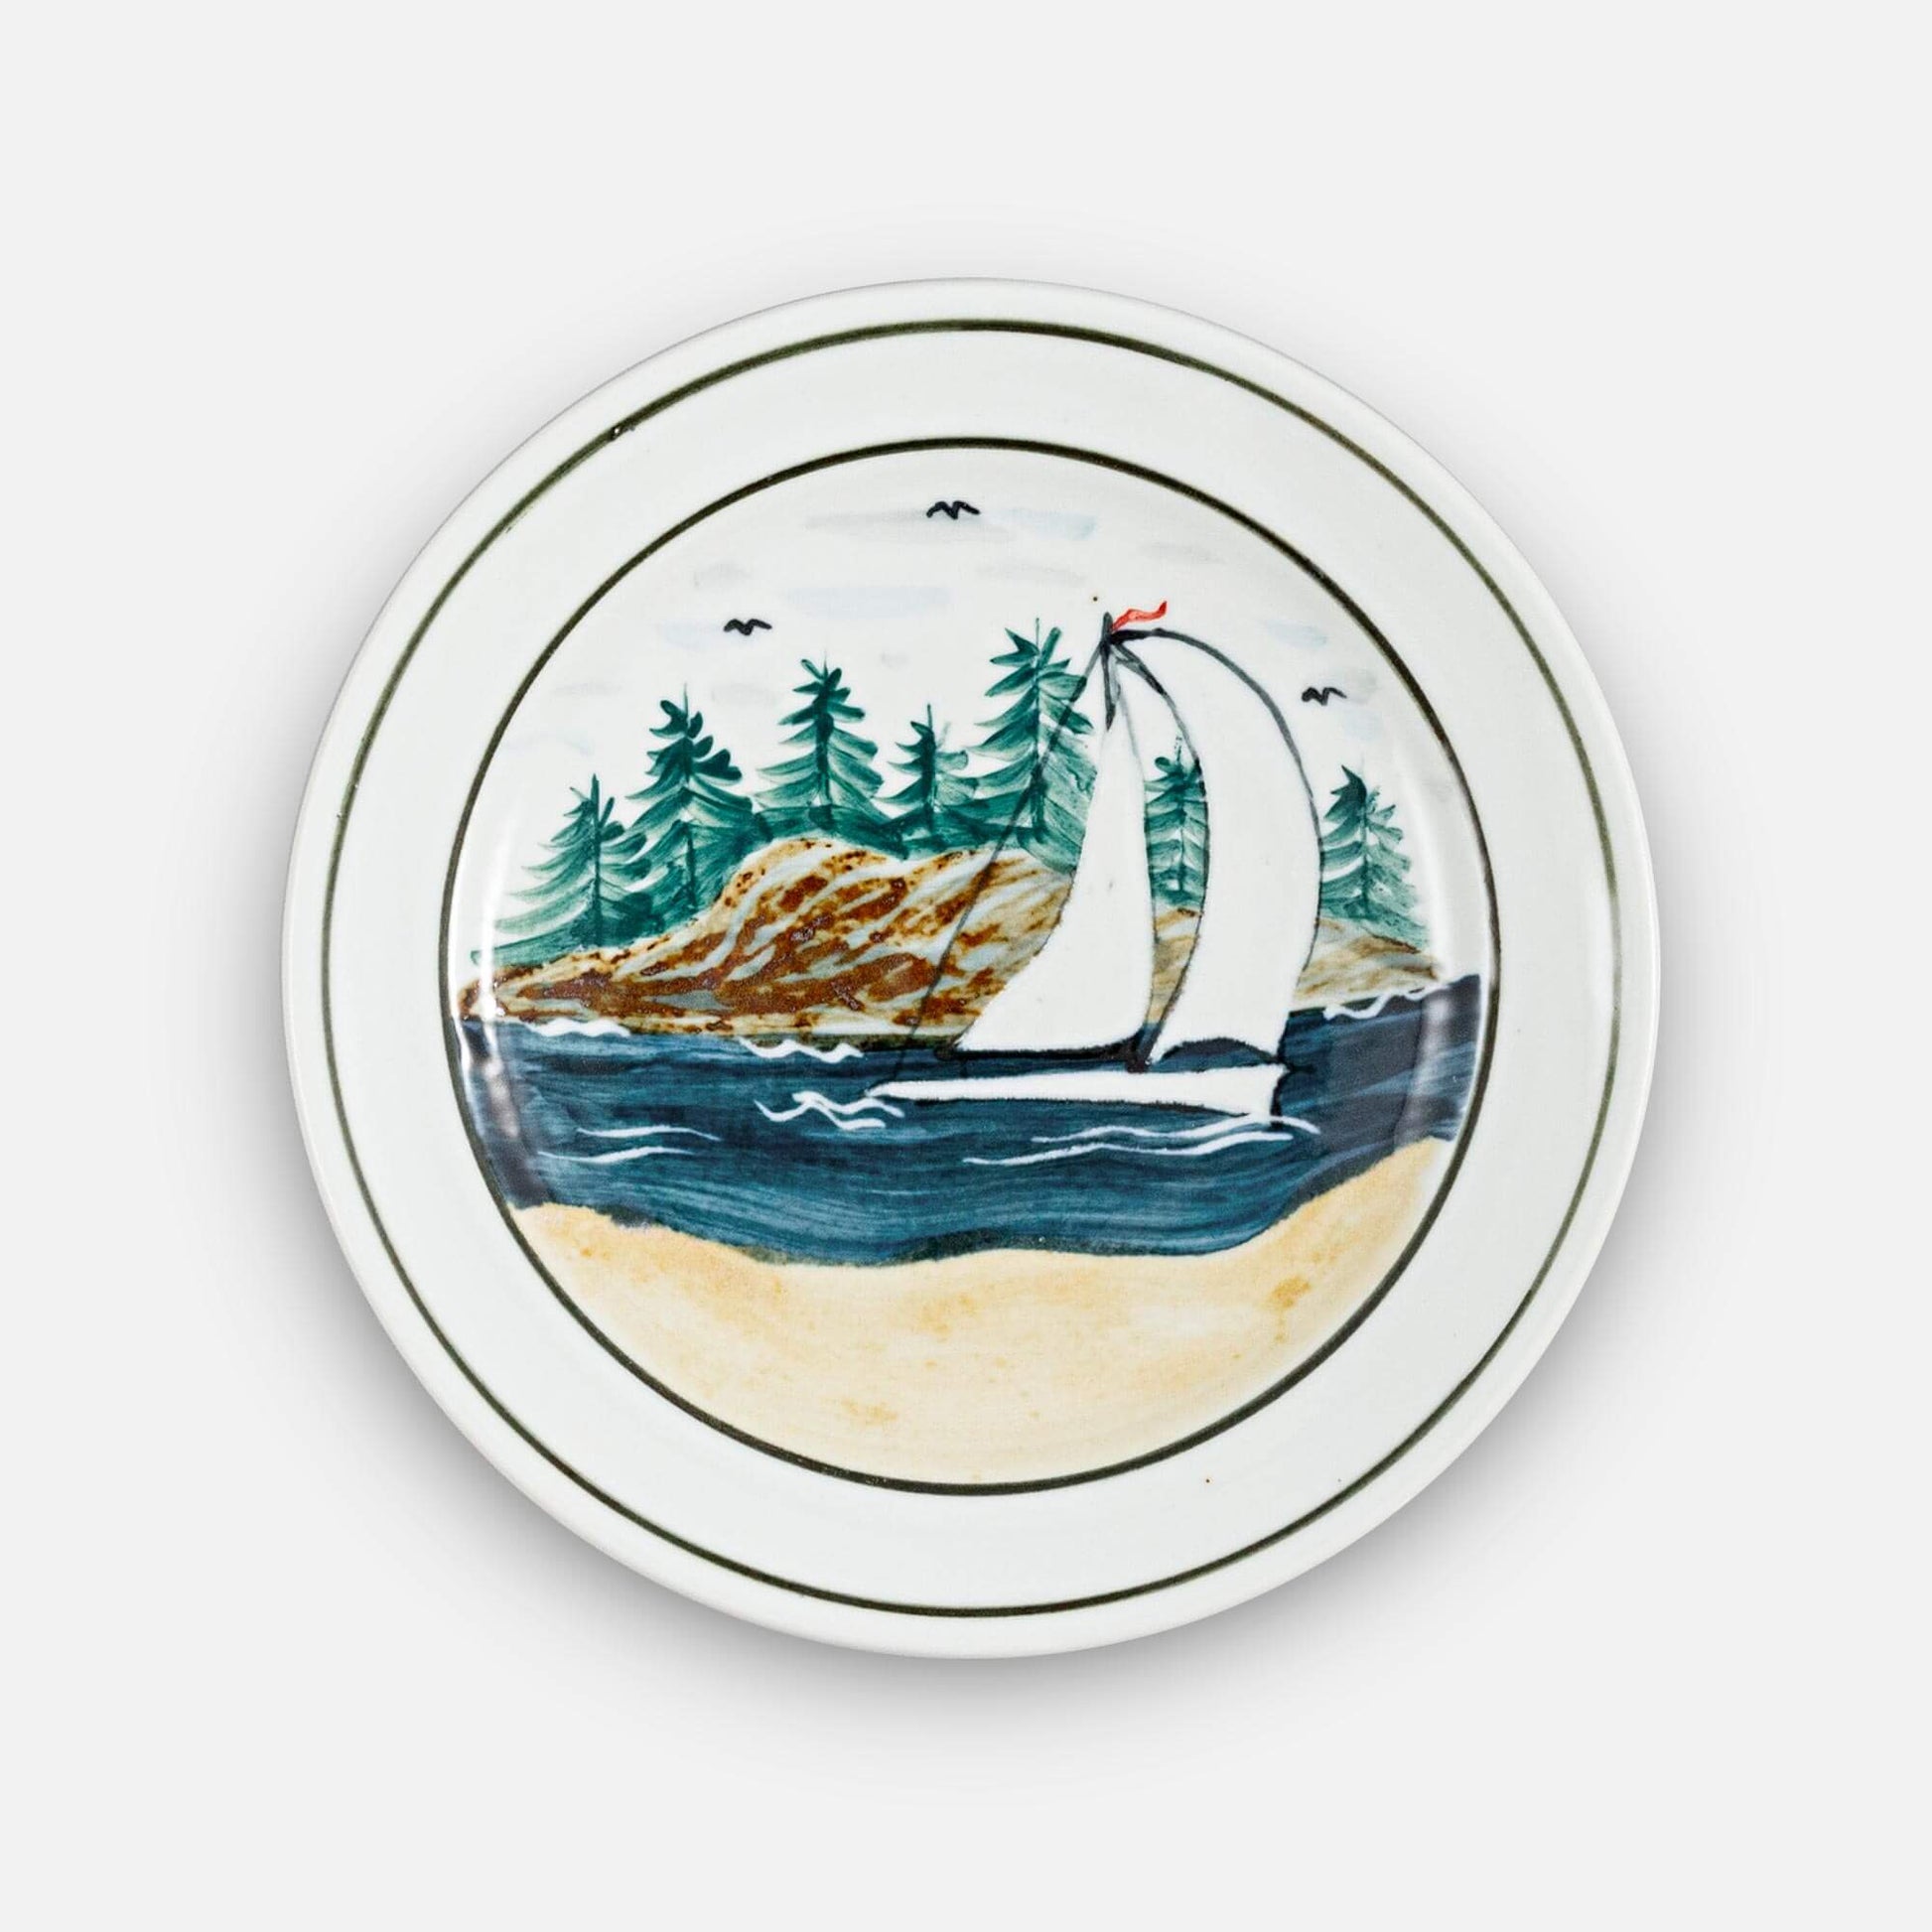 Handmade Pottery Footed Dessert Plate in Sailboat pattern made by Georgetown Pottery in Maine